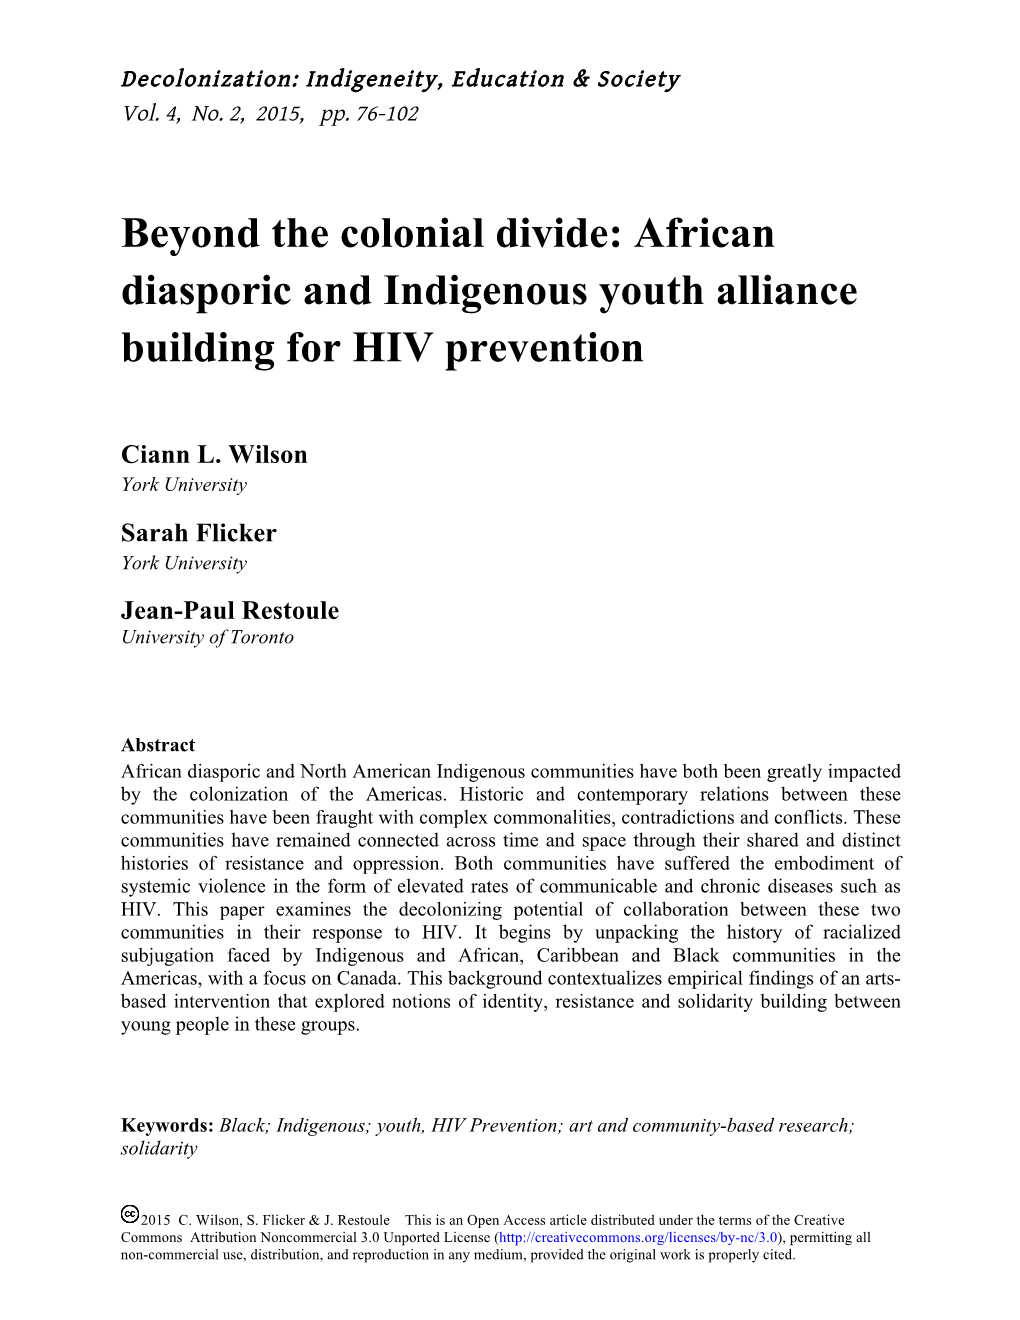 African Diasporic and Indigenous Youth Alliance Building for HIV Prevention